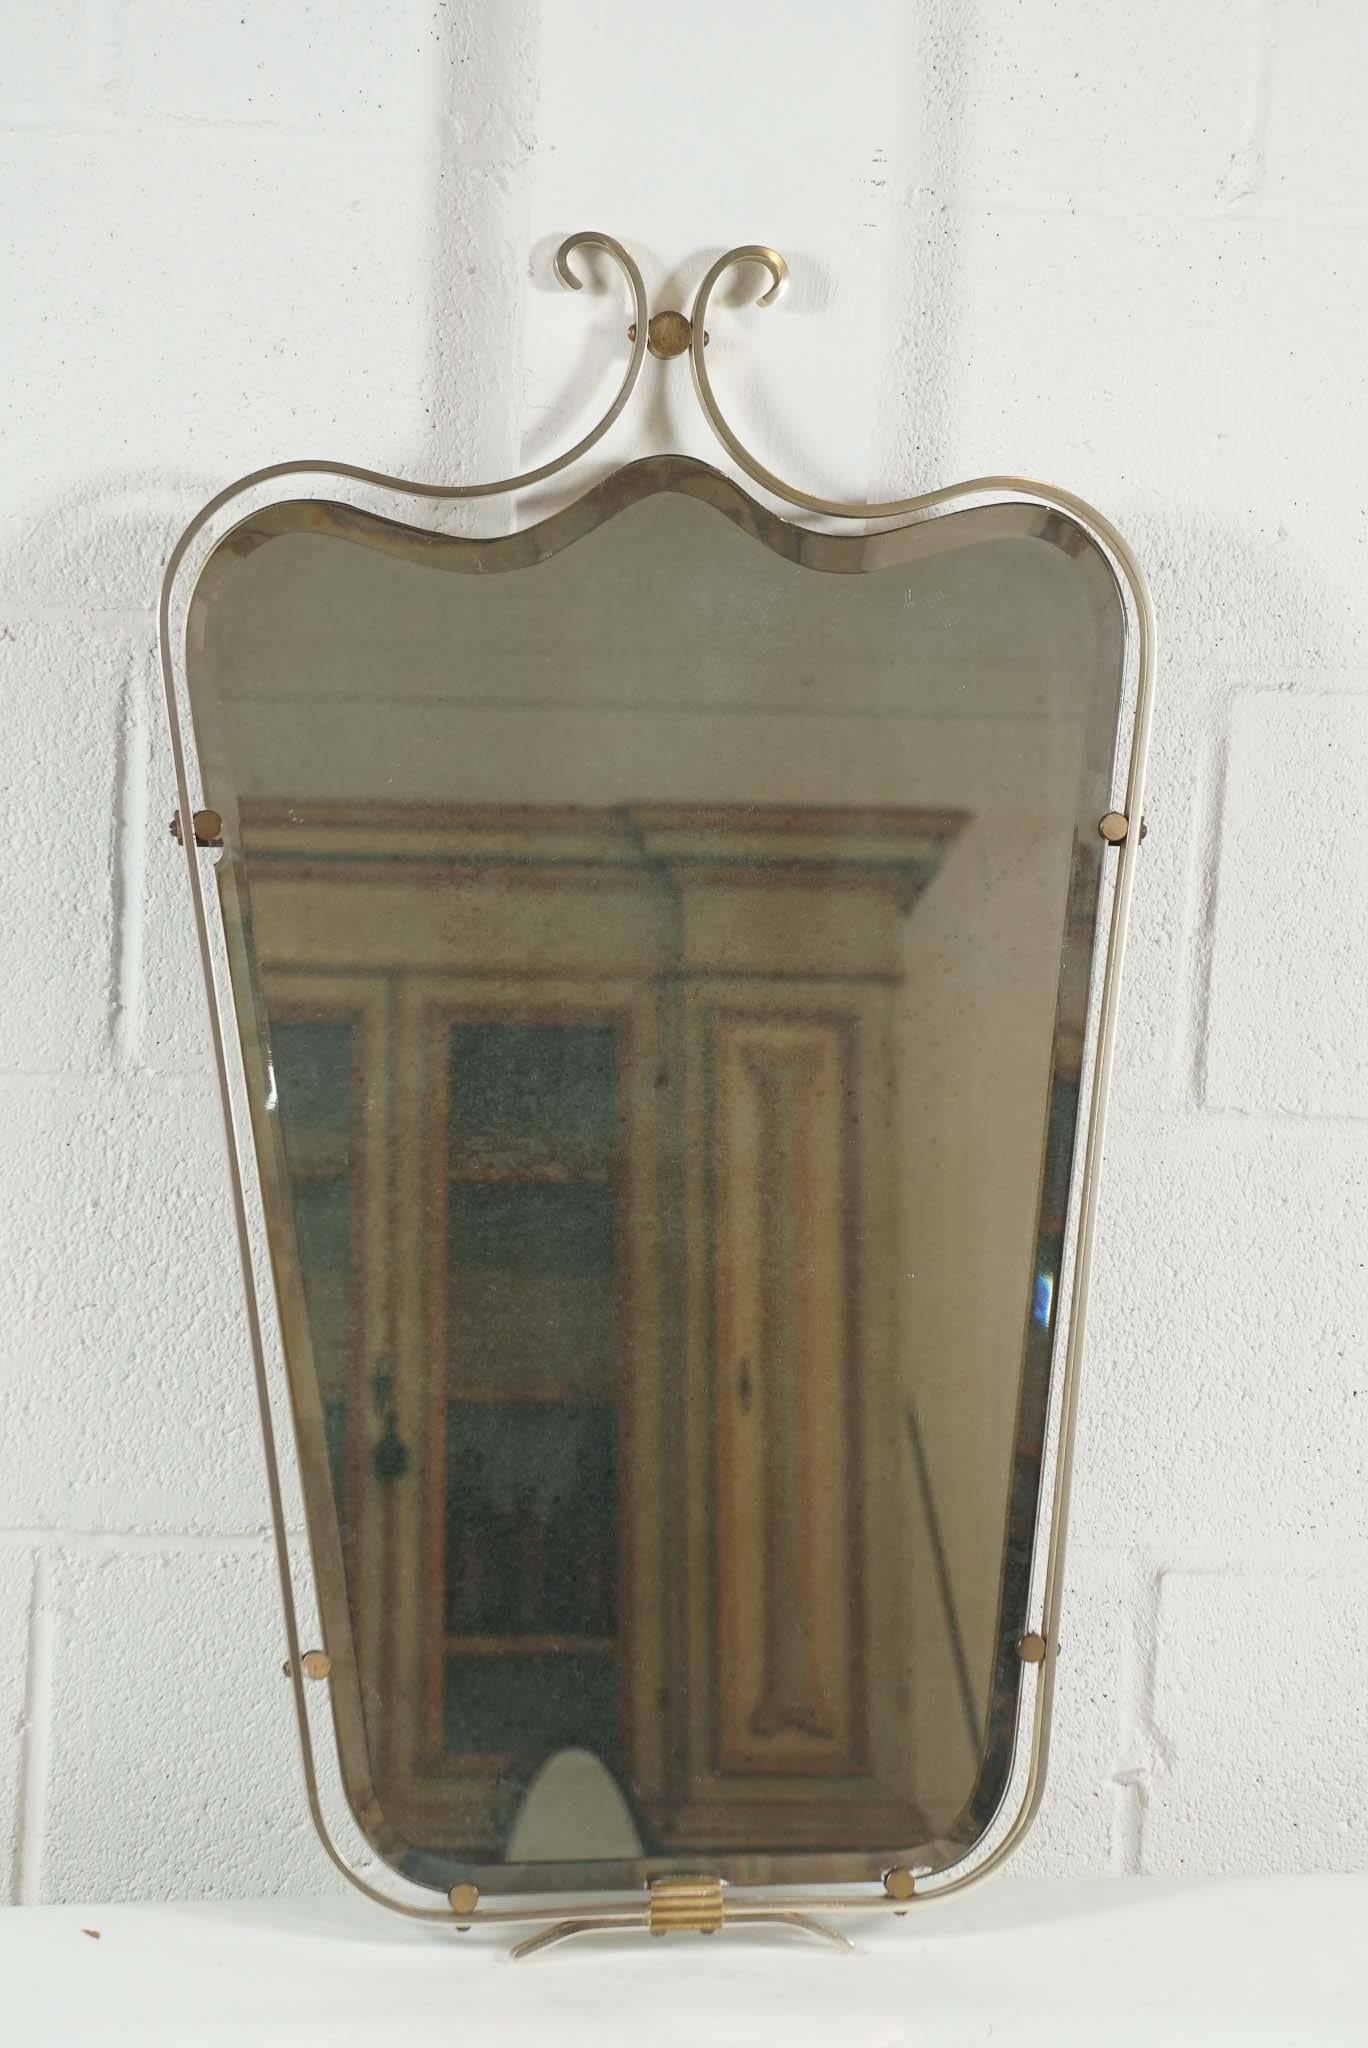 Here is a chic small-scaled French mirror in brass with a fogged beveled mirror.
The mirror is inset to the circular clips inside the frame.